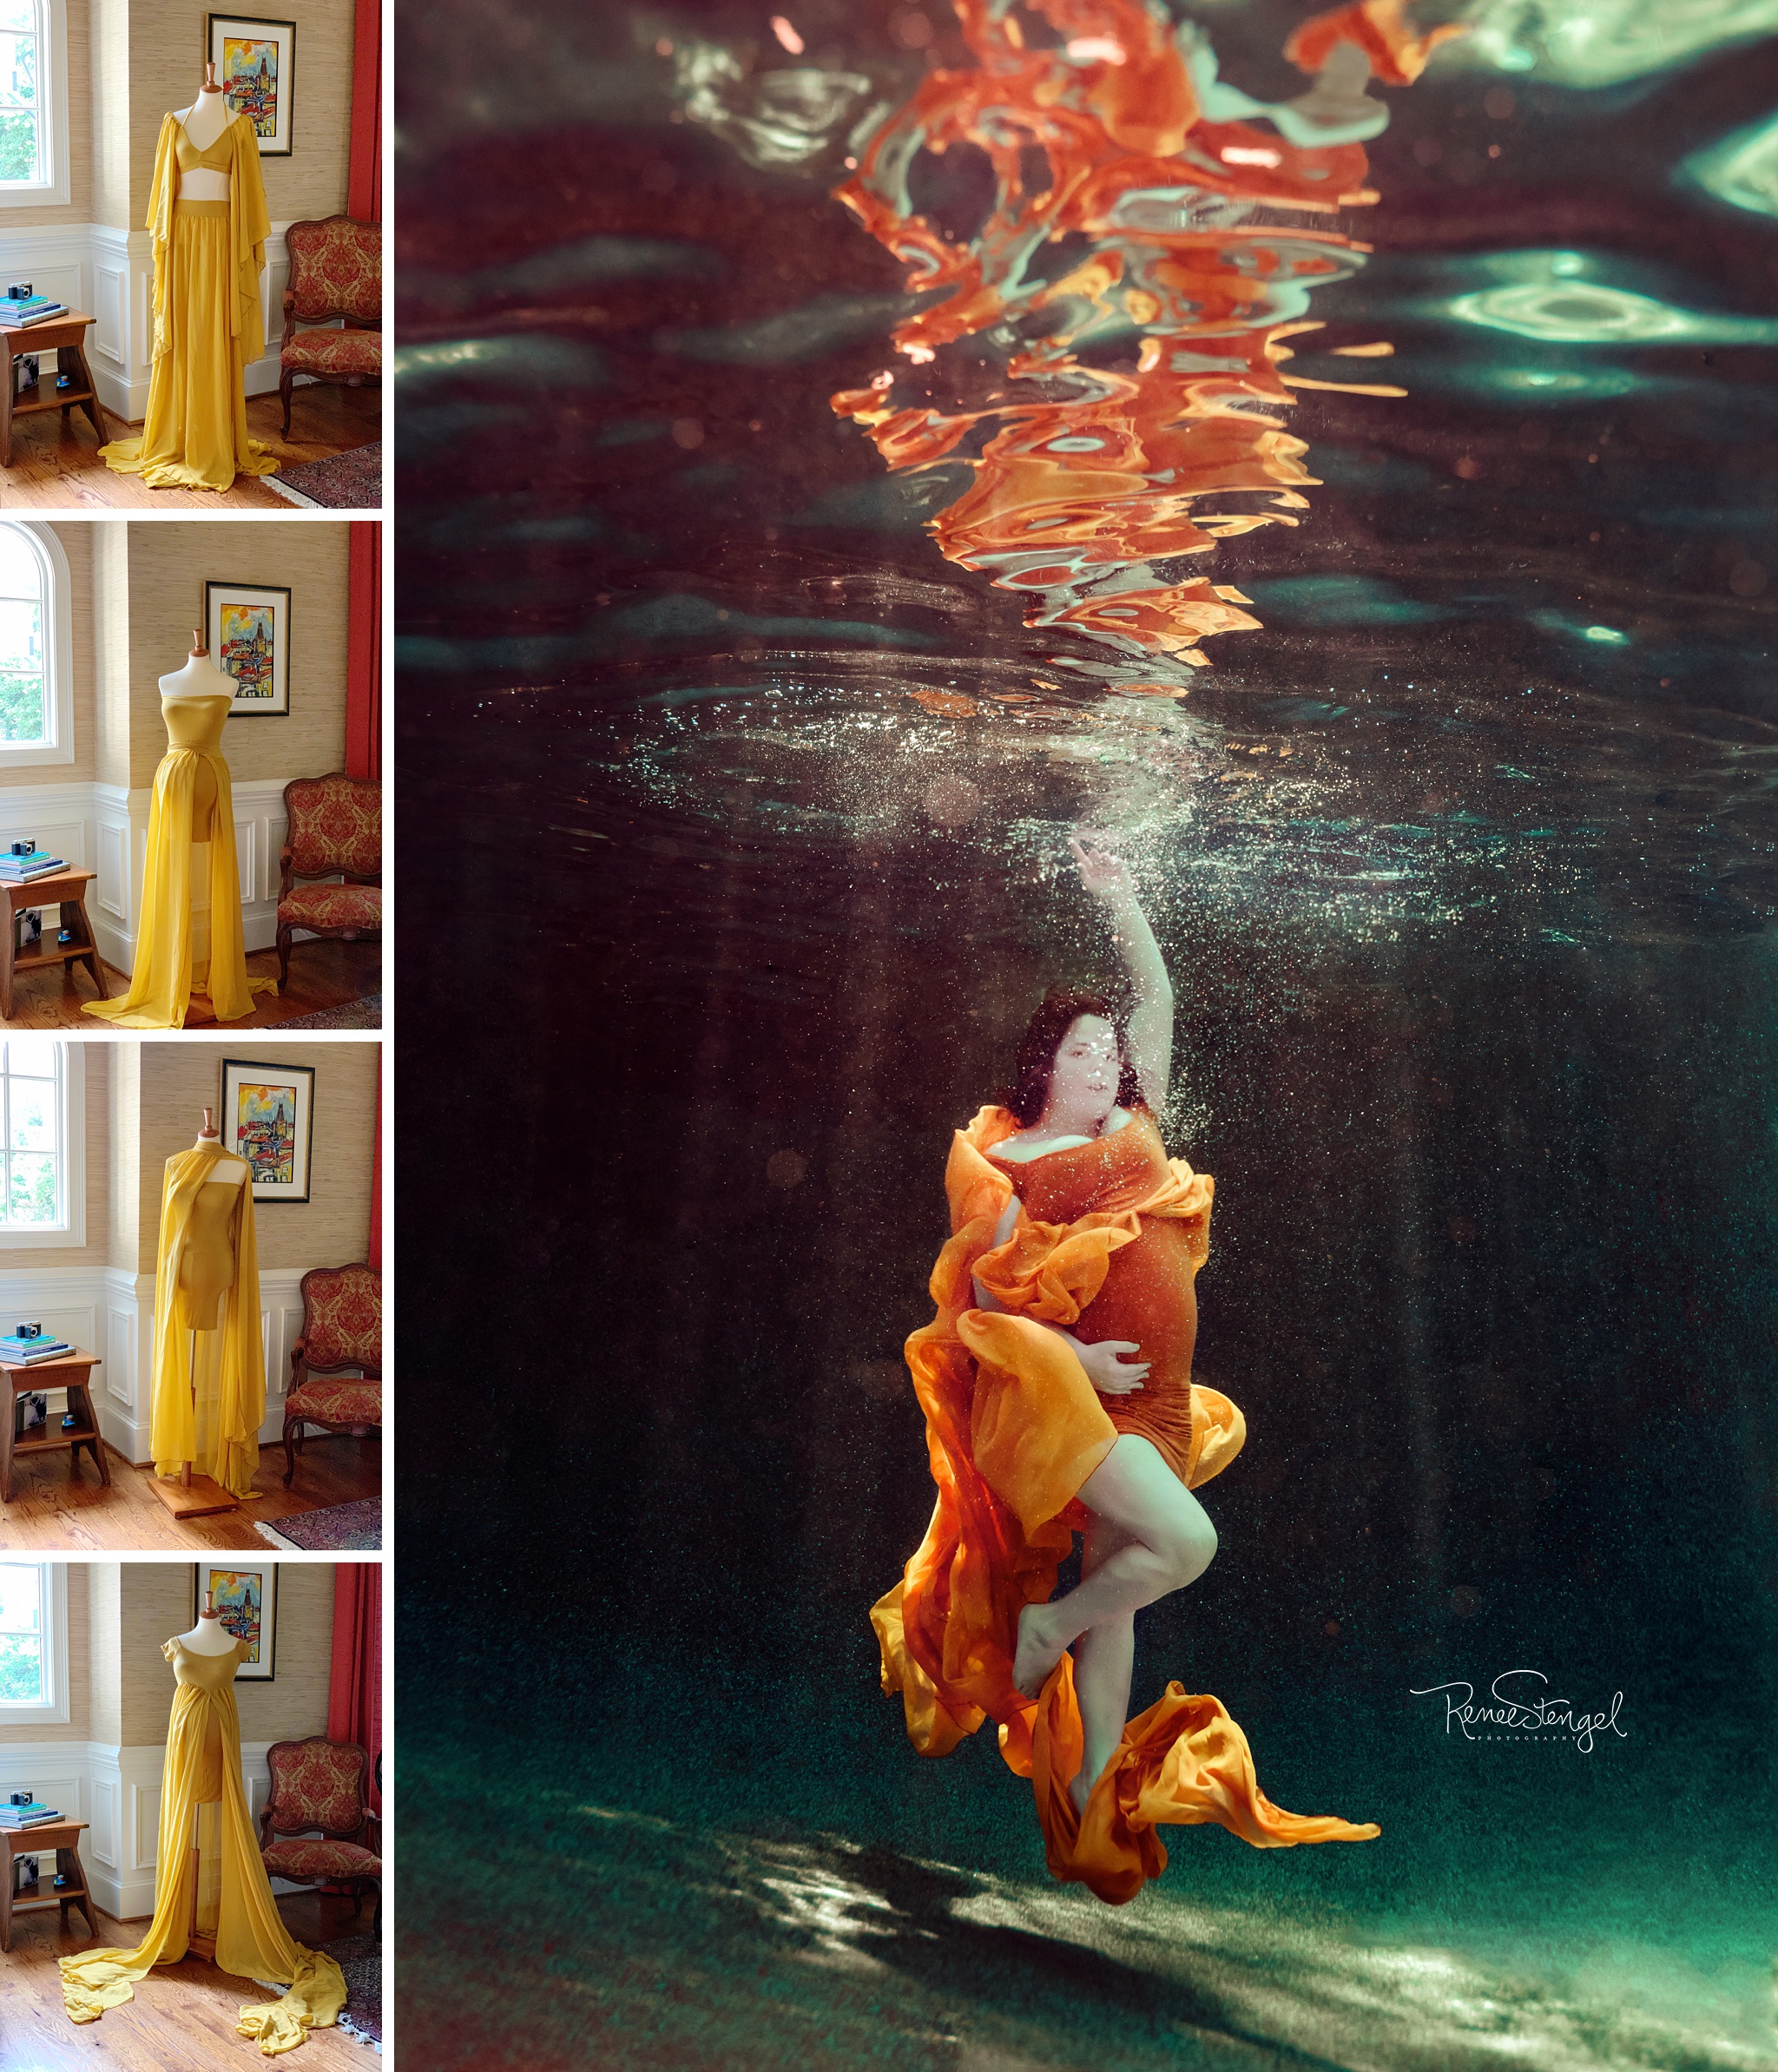 Underwater Maternity Photo and Studio Closet Collection of Gold Chiffon and Knit Couture Gowns from Sew Trendy Accessories